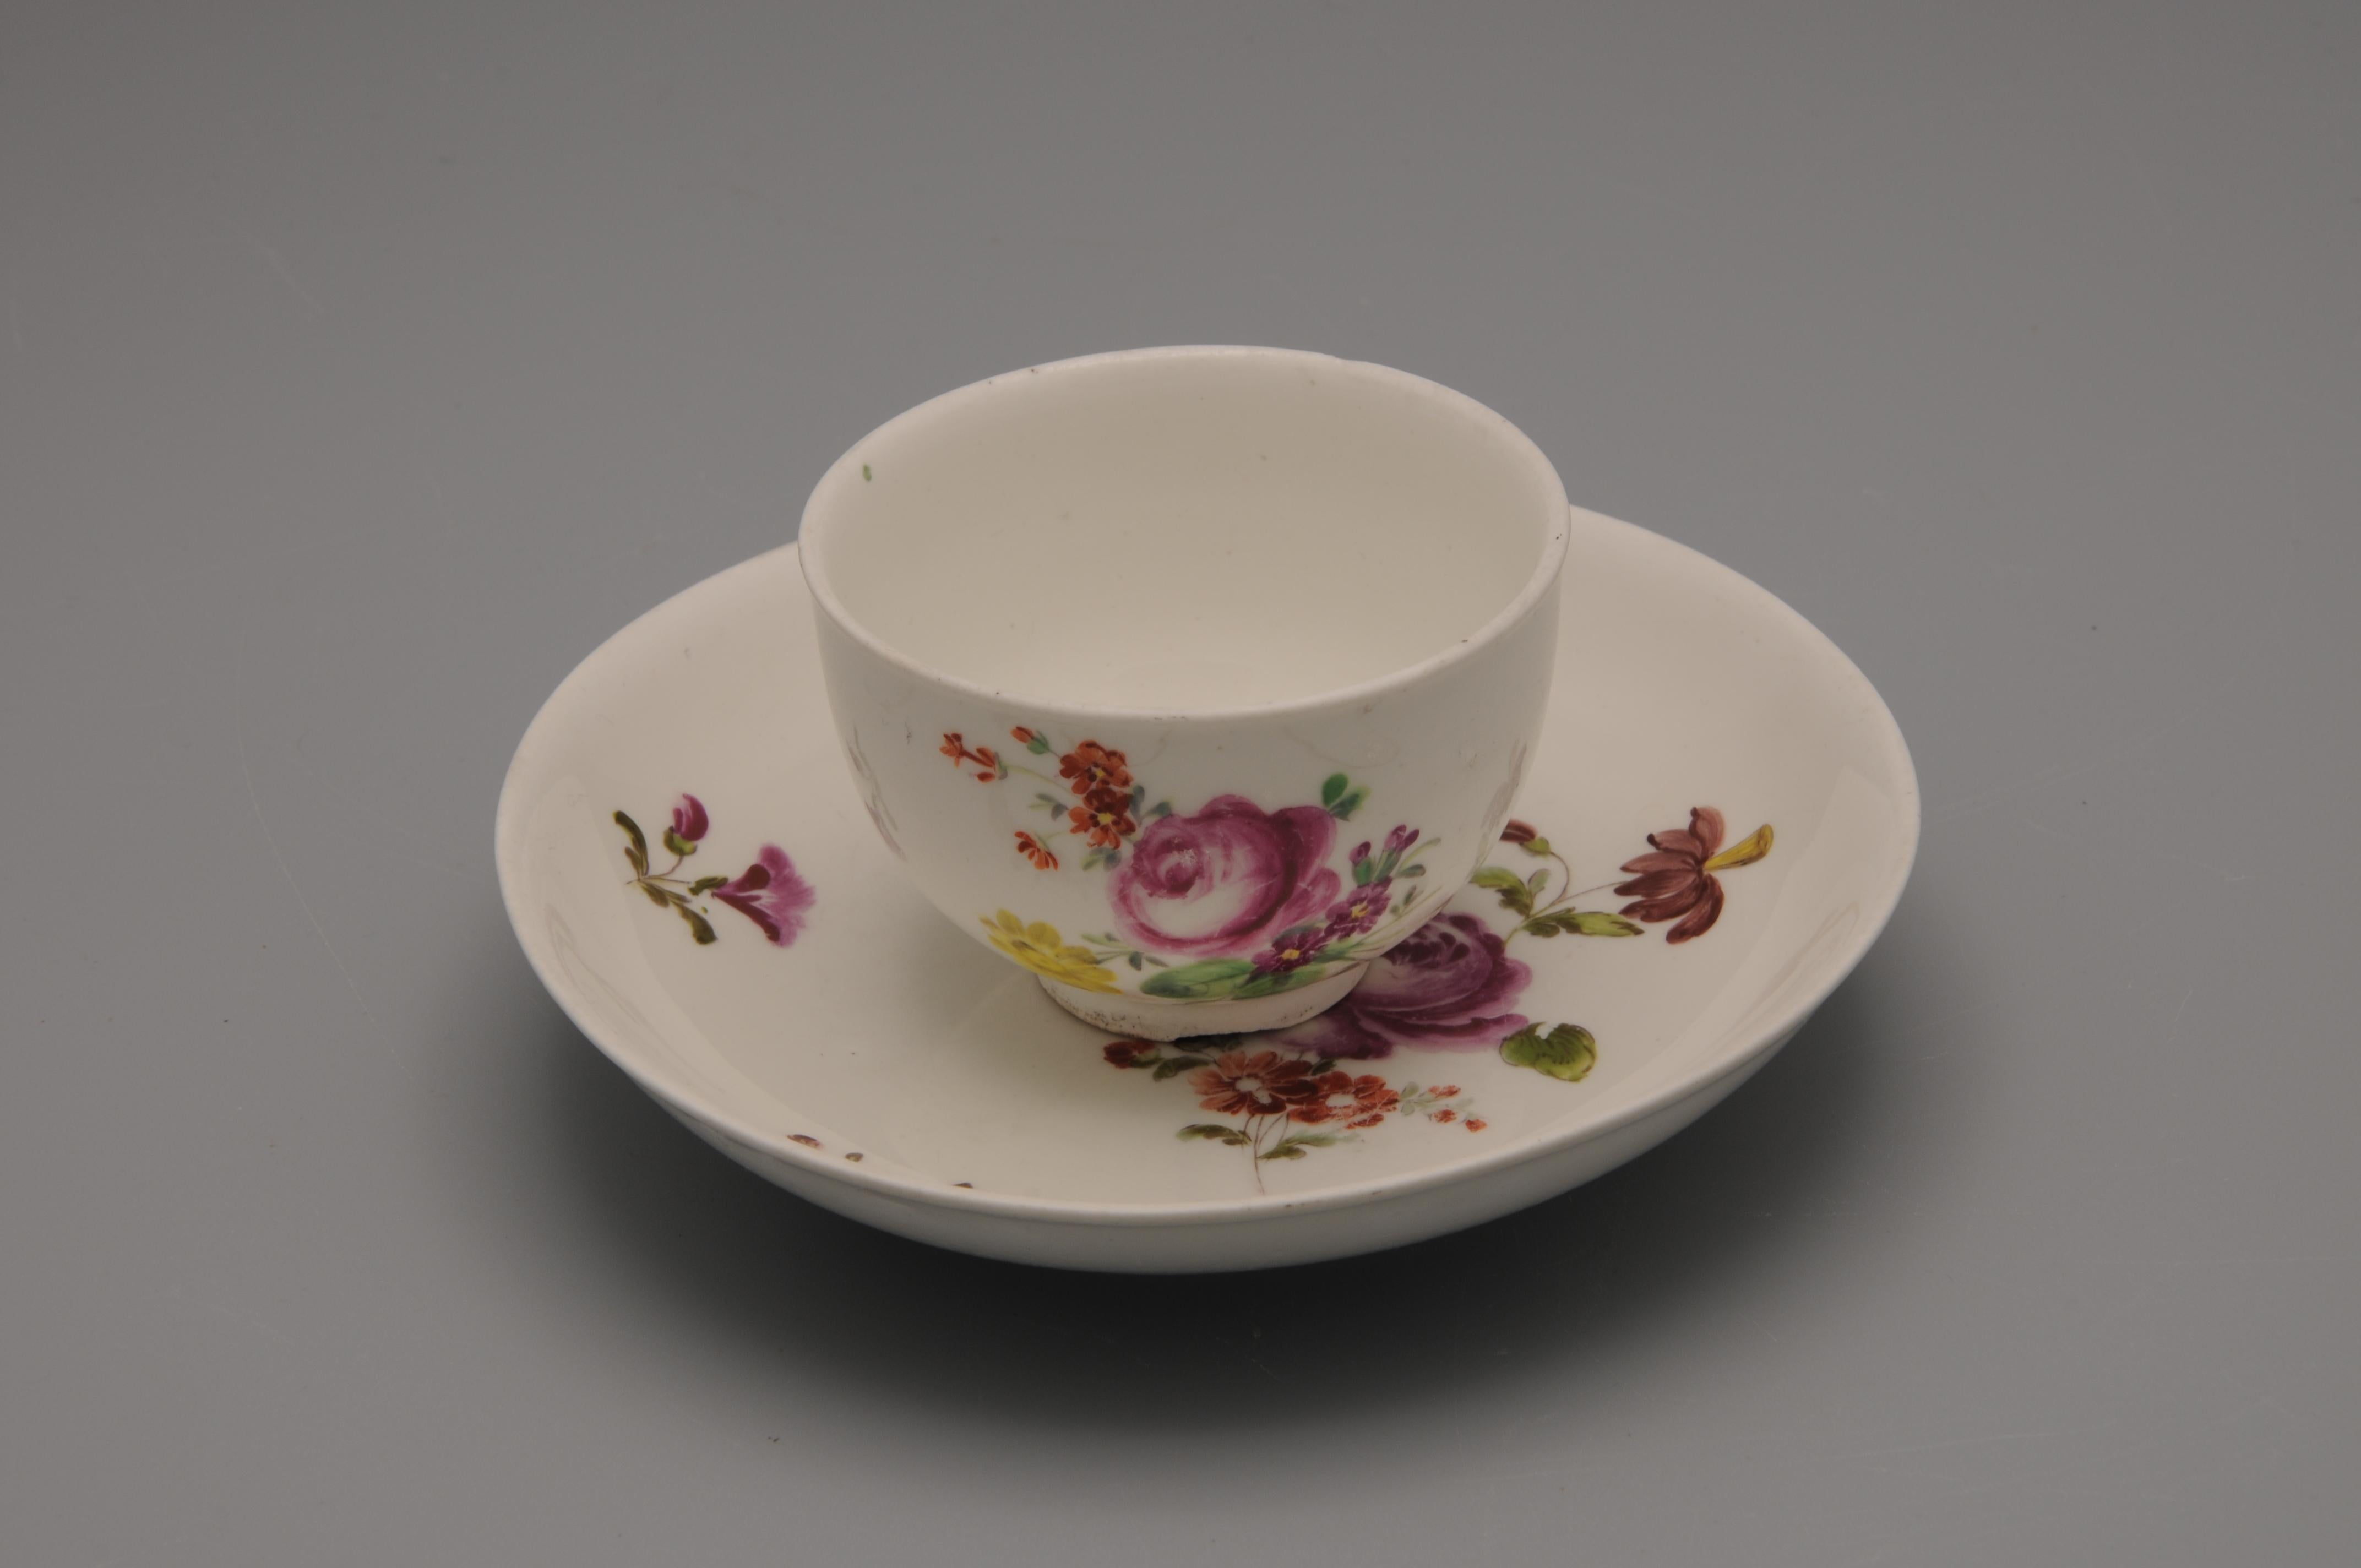 Vienna Porcelain Coffee or Mokka Cup and Saucer with floral decoration.

Product of the Vienna Porcelain Manufactory (German: Kaiserlich privilegierte Porcellain Fabrique), a porcelain manufacturer in Alsergrund in Vienna, Austria. It was founded in